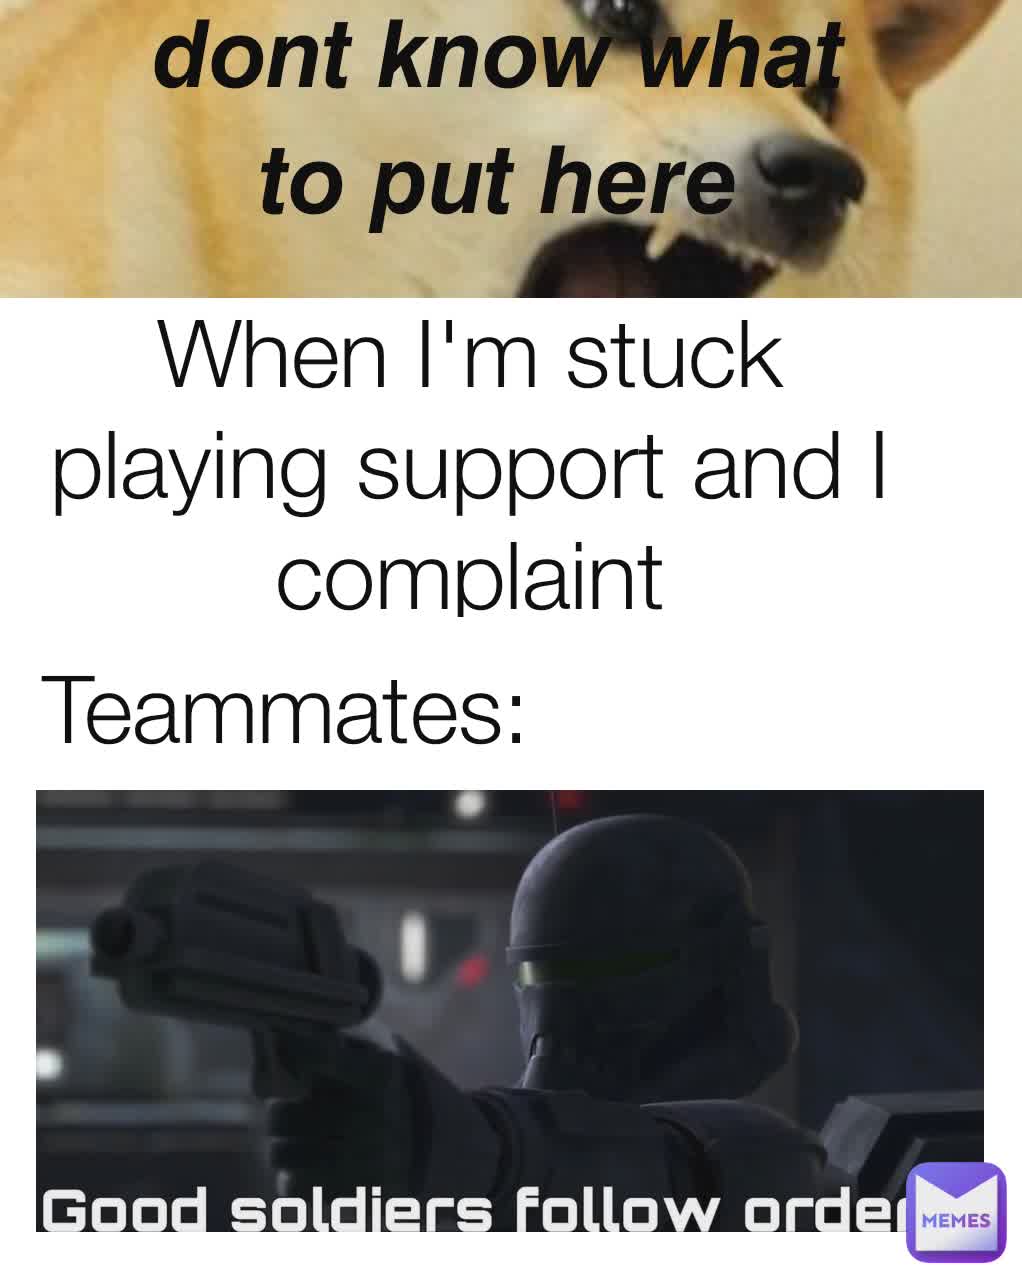 Teammates:
 When I'm stuck playing support and I complaint 𝙙𝙤𝙣𝙩 𝙠𝙣𝙤𝙬 𝙬𝙝𝙖𝙩 𝙩𝙤 𝙥𝙪𝙩 𝙝𝙚𝙧𝙚